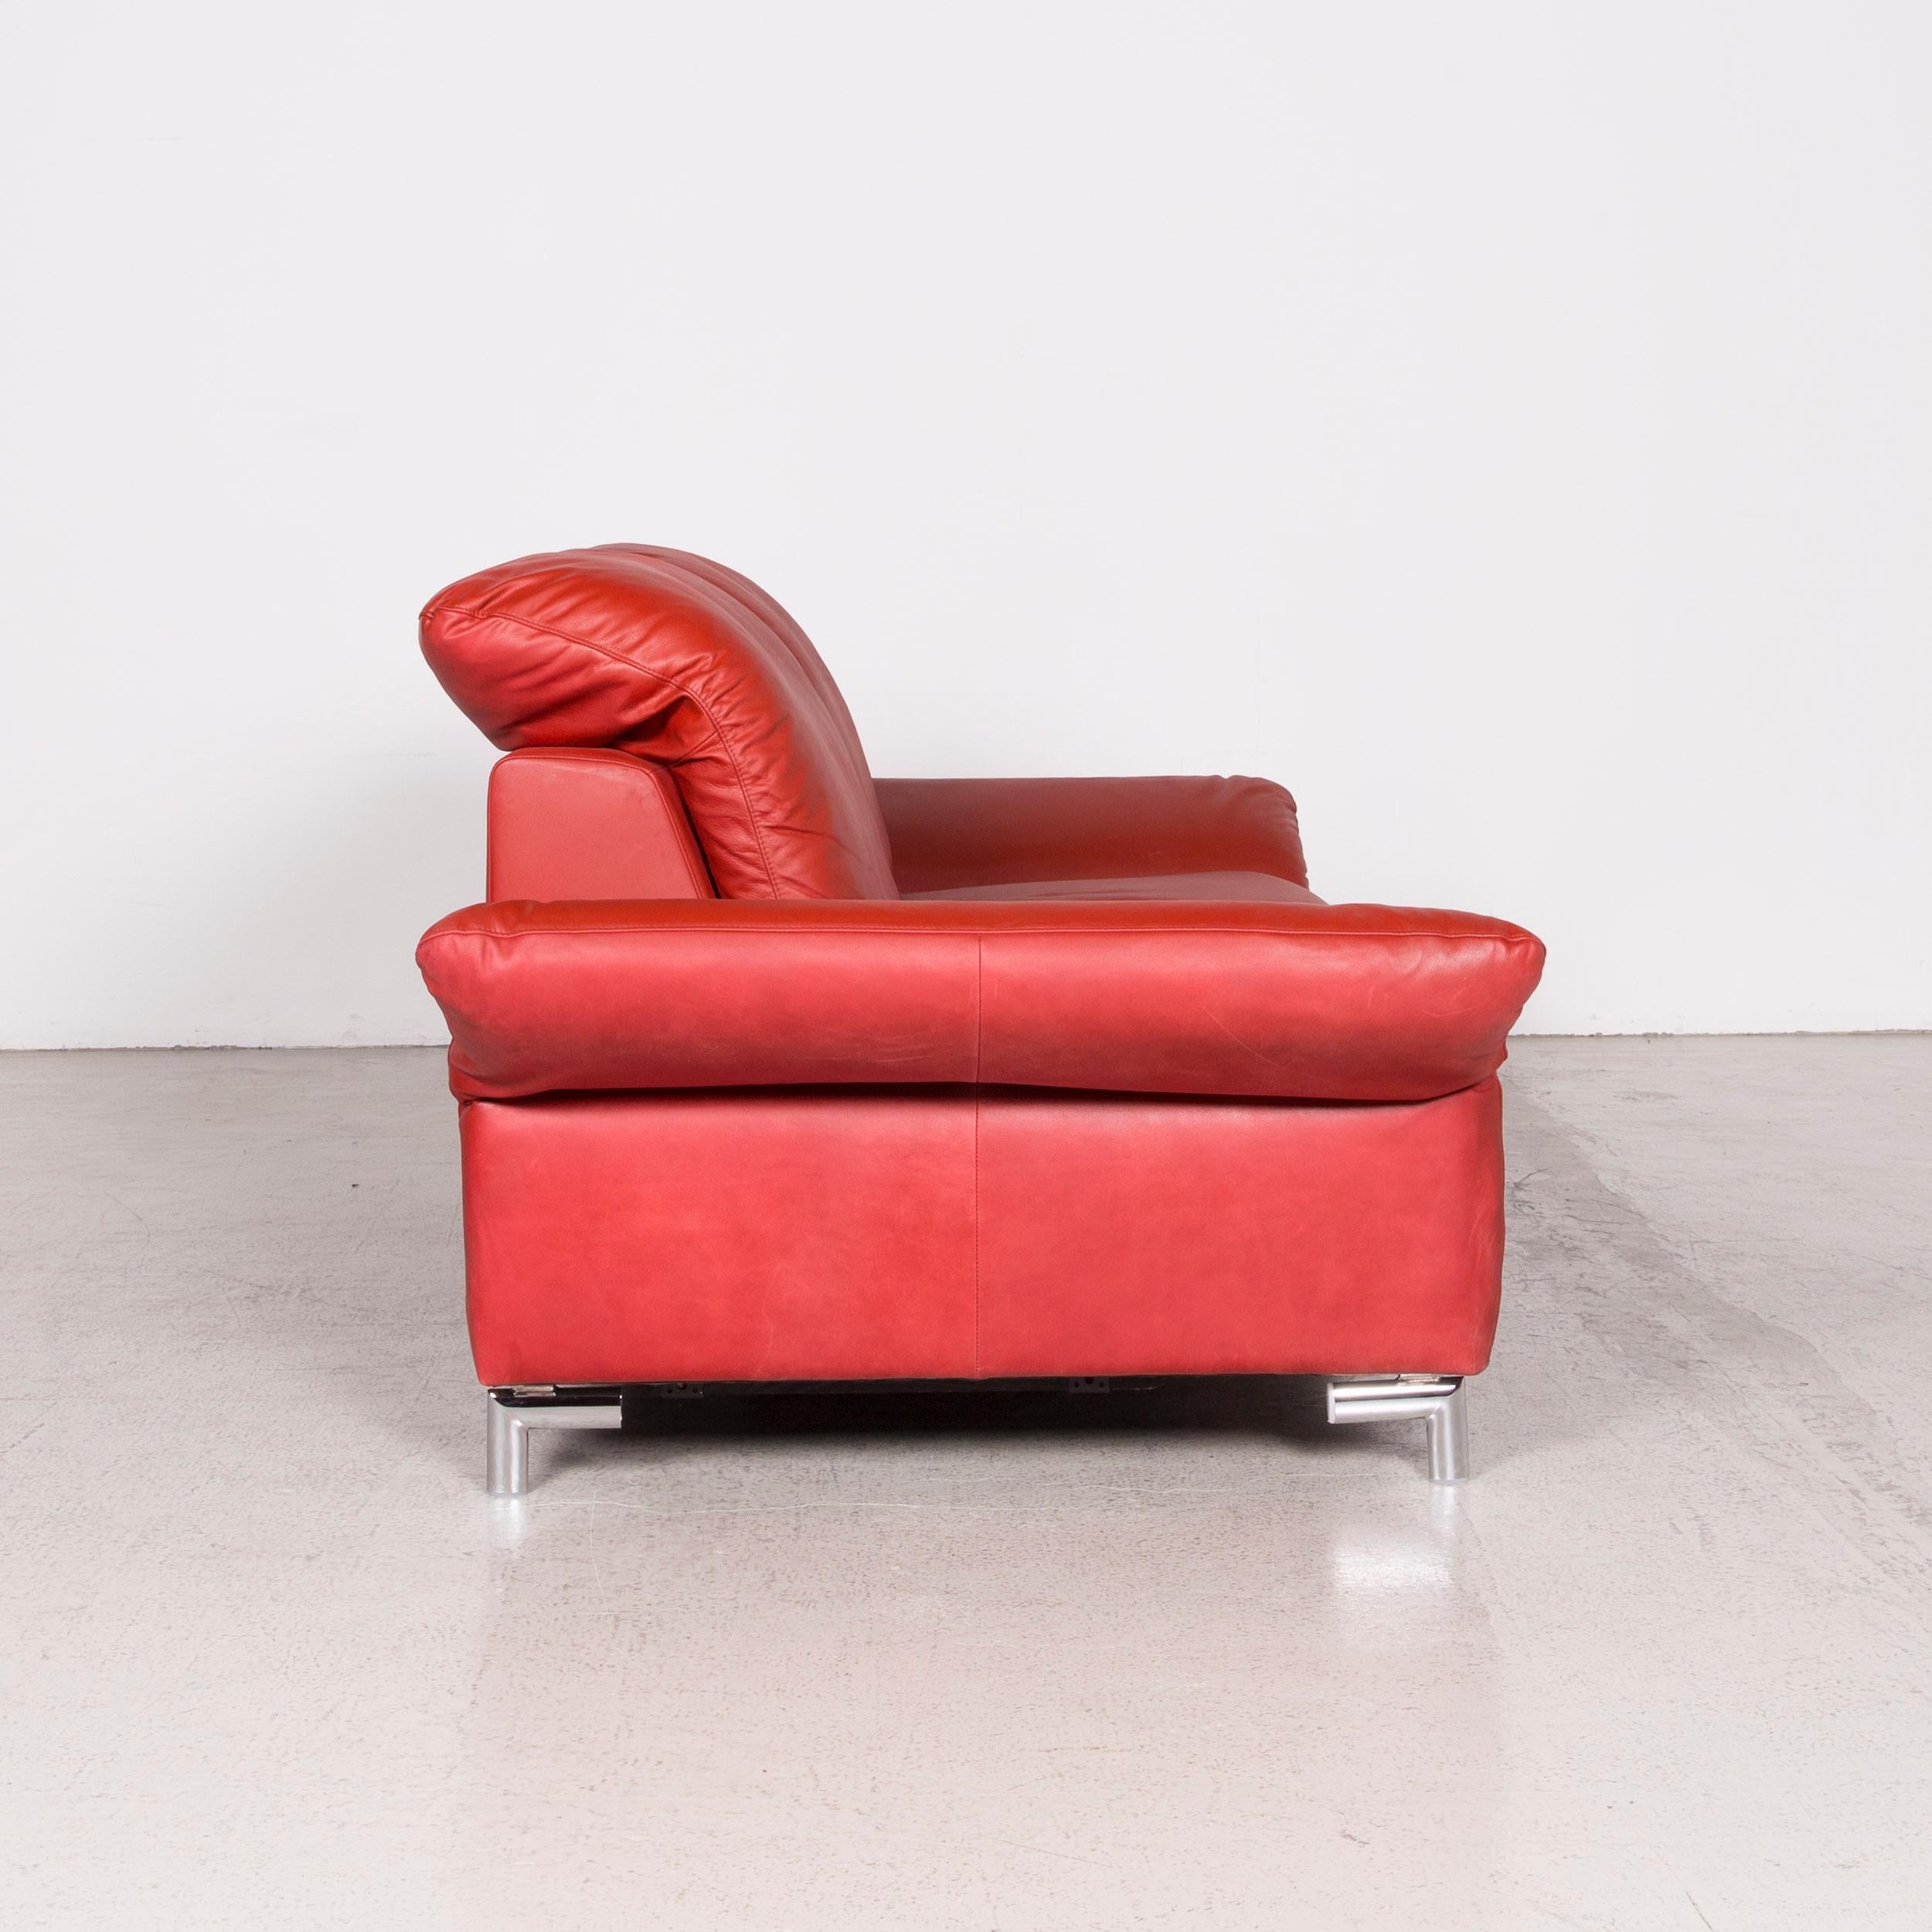 Willi Schillig Siena Designer Leather Sofa Red Real Leather Dreisityer Couch For Sale 4